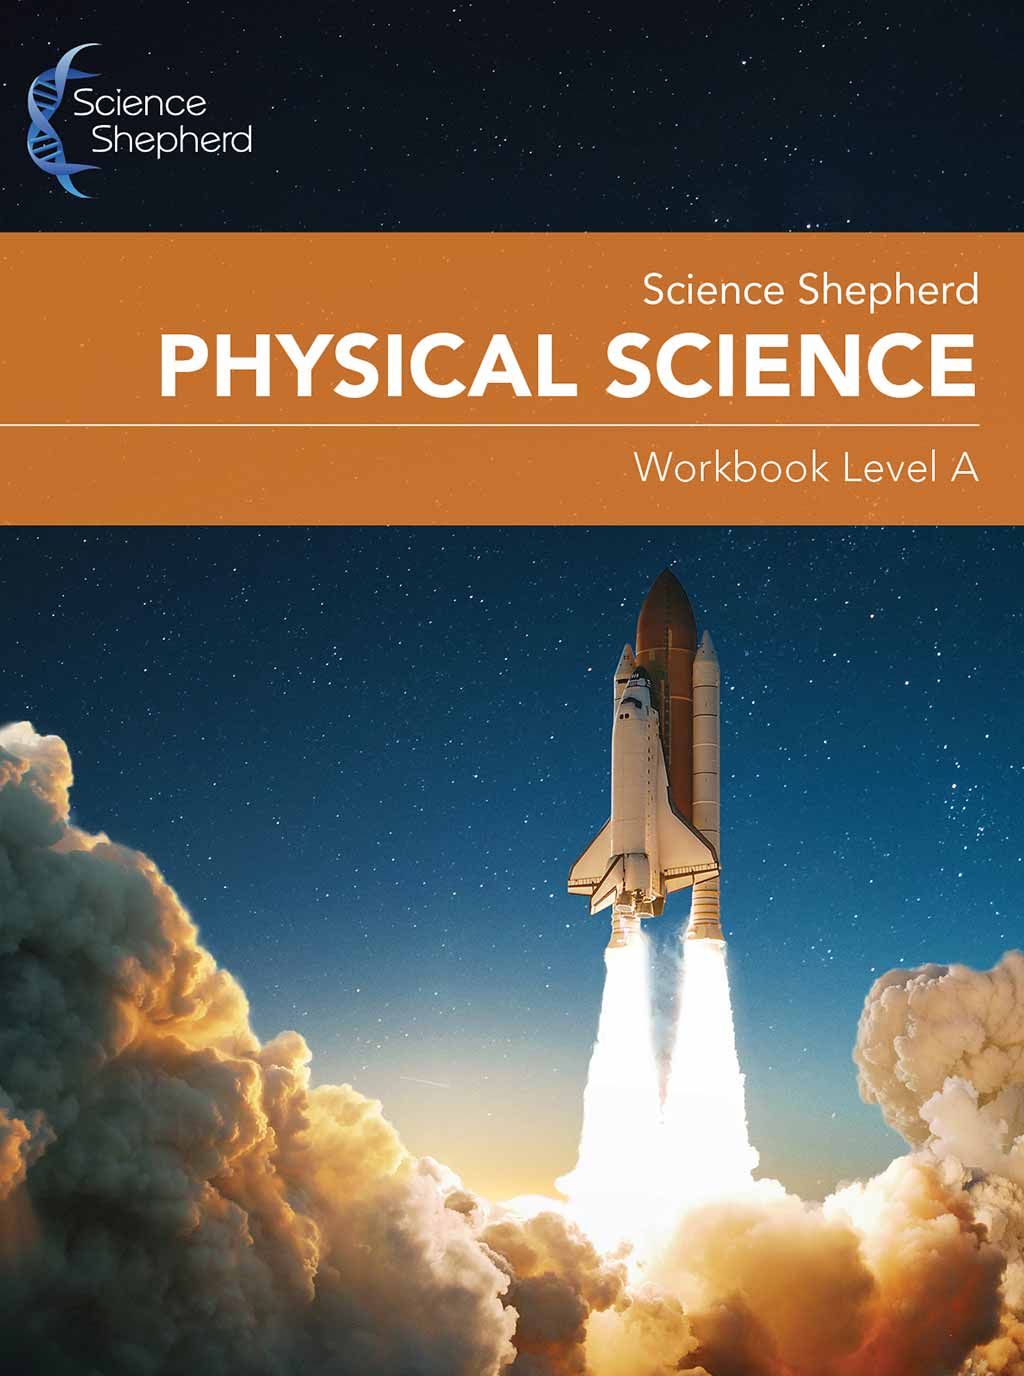 3rd grade homeschool Physical Science Workbook Level A cover of a shuttle launch